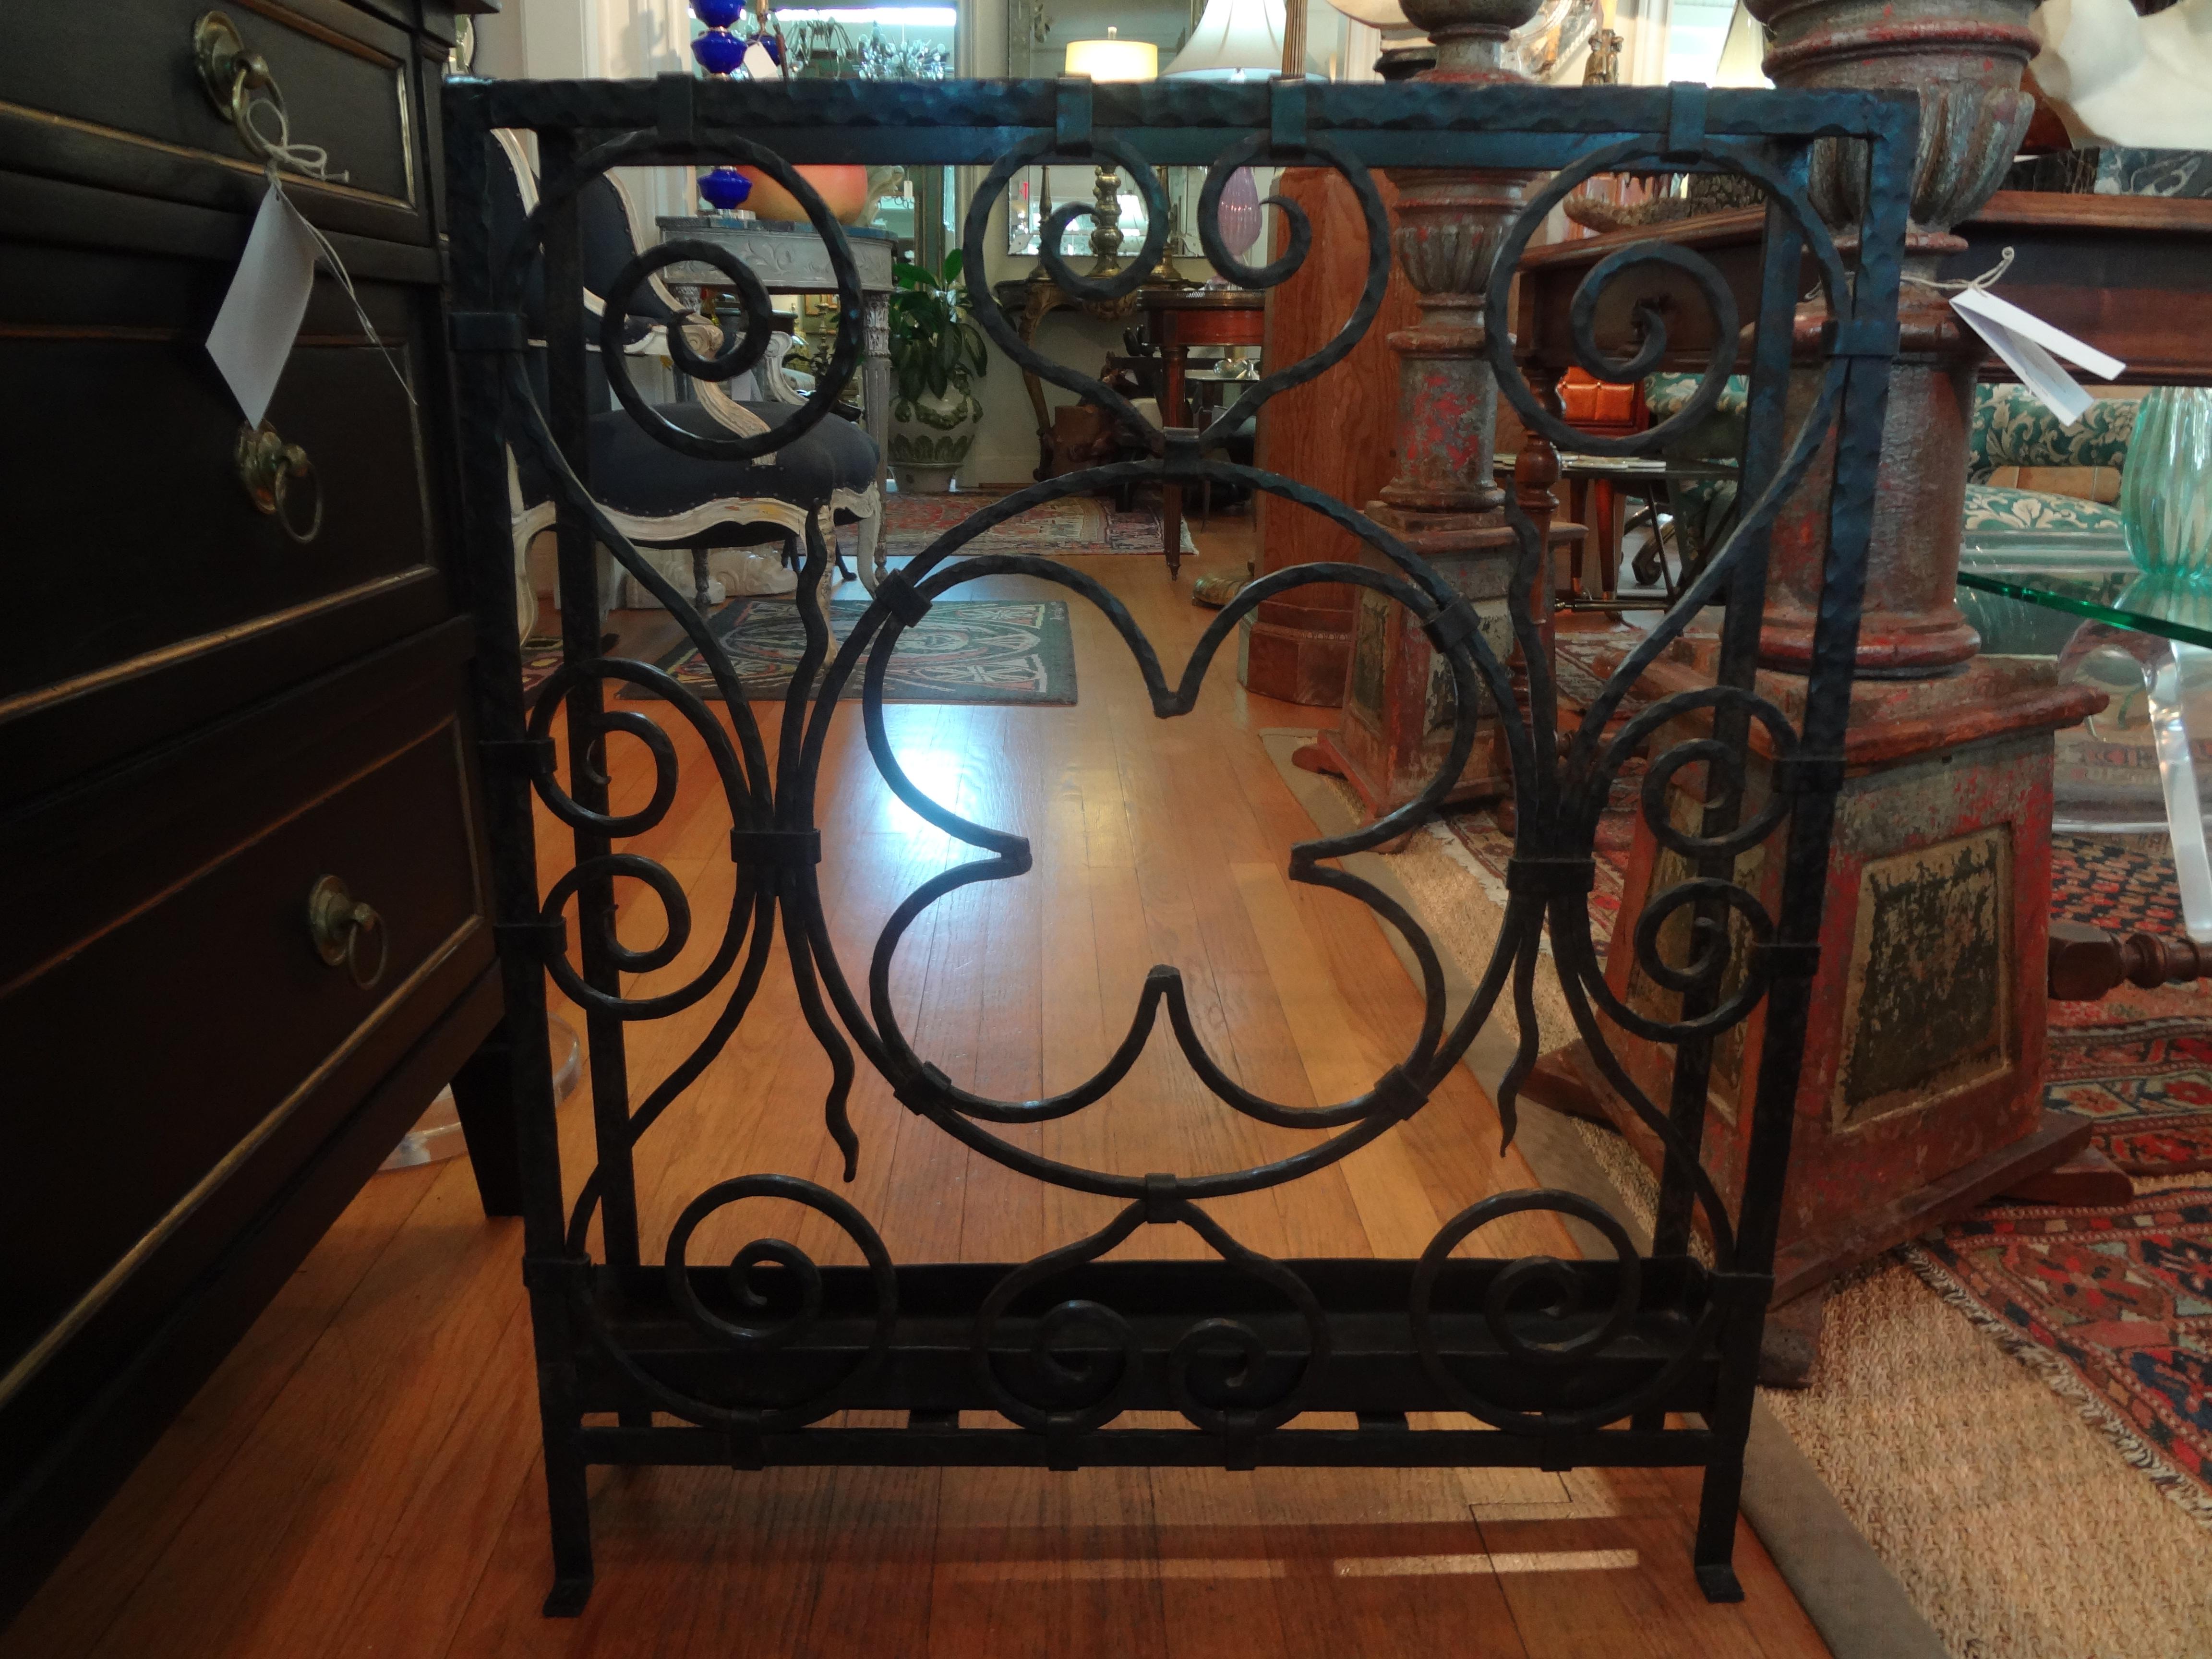 Stunning French Art Deco hand forged wrought iron umbrella stand. This stylized umbrella stand is both functional and gorgeous. This French Art Deco geometric umbrella stand in the style of Edgar Brandt retains the original drip pan and dates to the